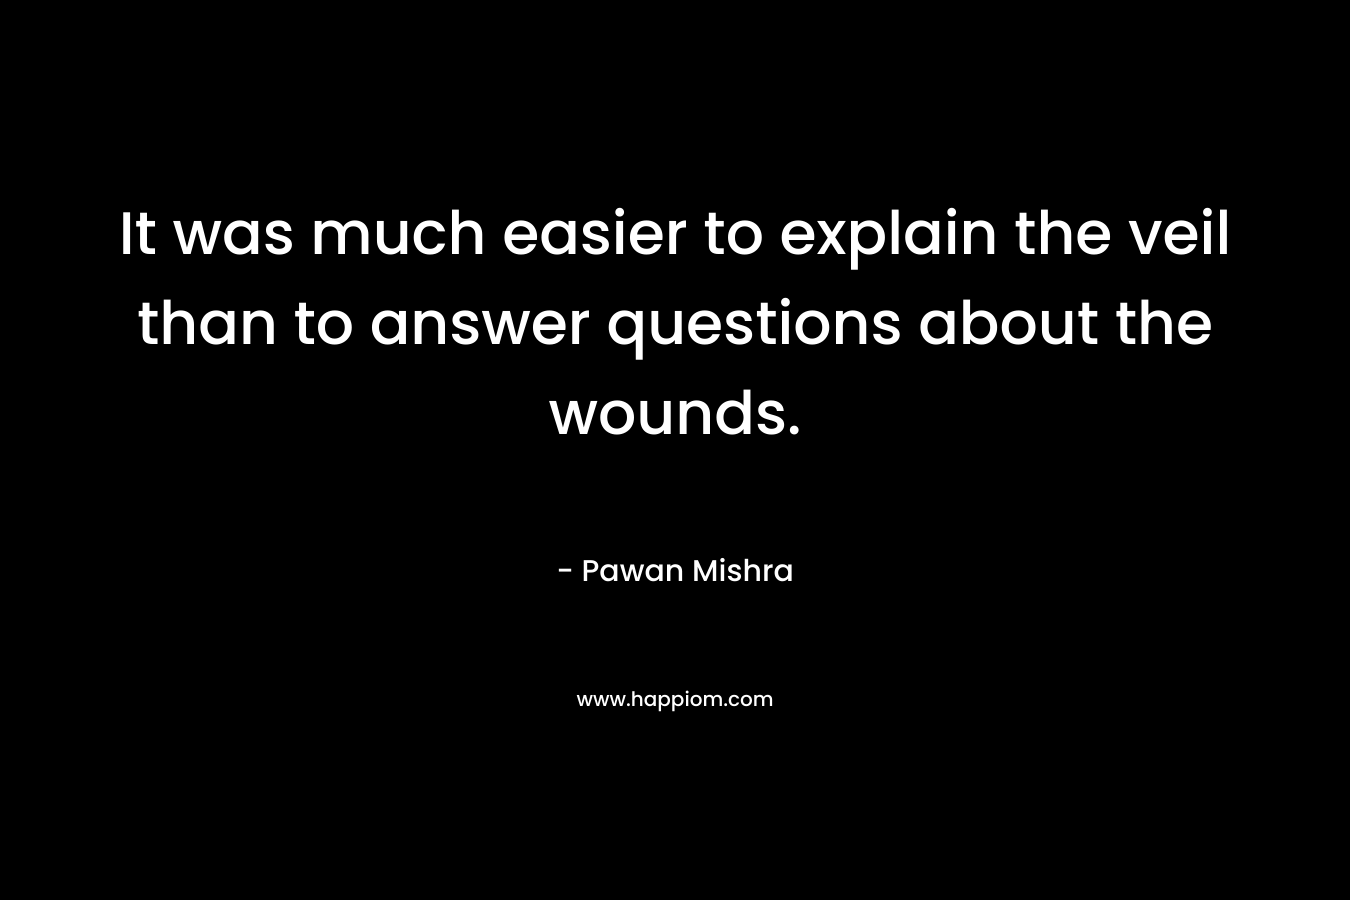 It was much easier to explain the veil than to answer questions about the wounds. – Pawan Mishra